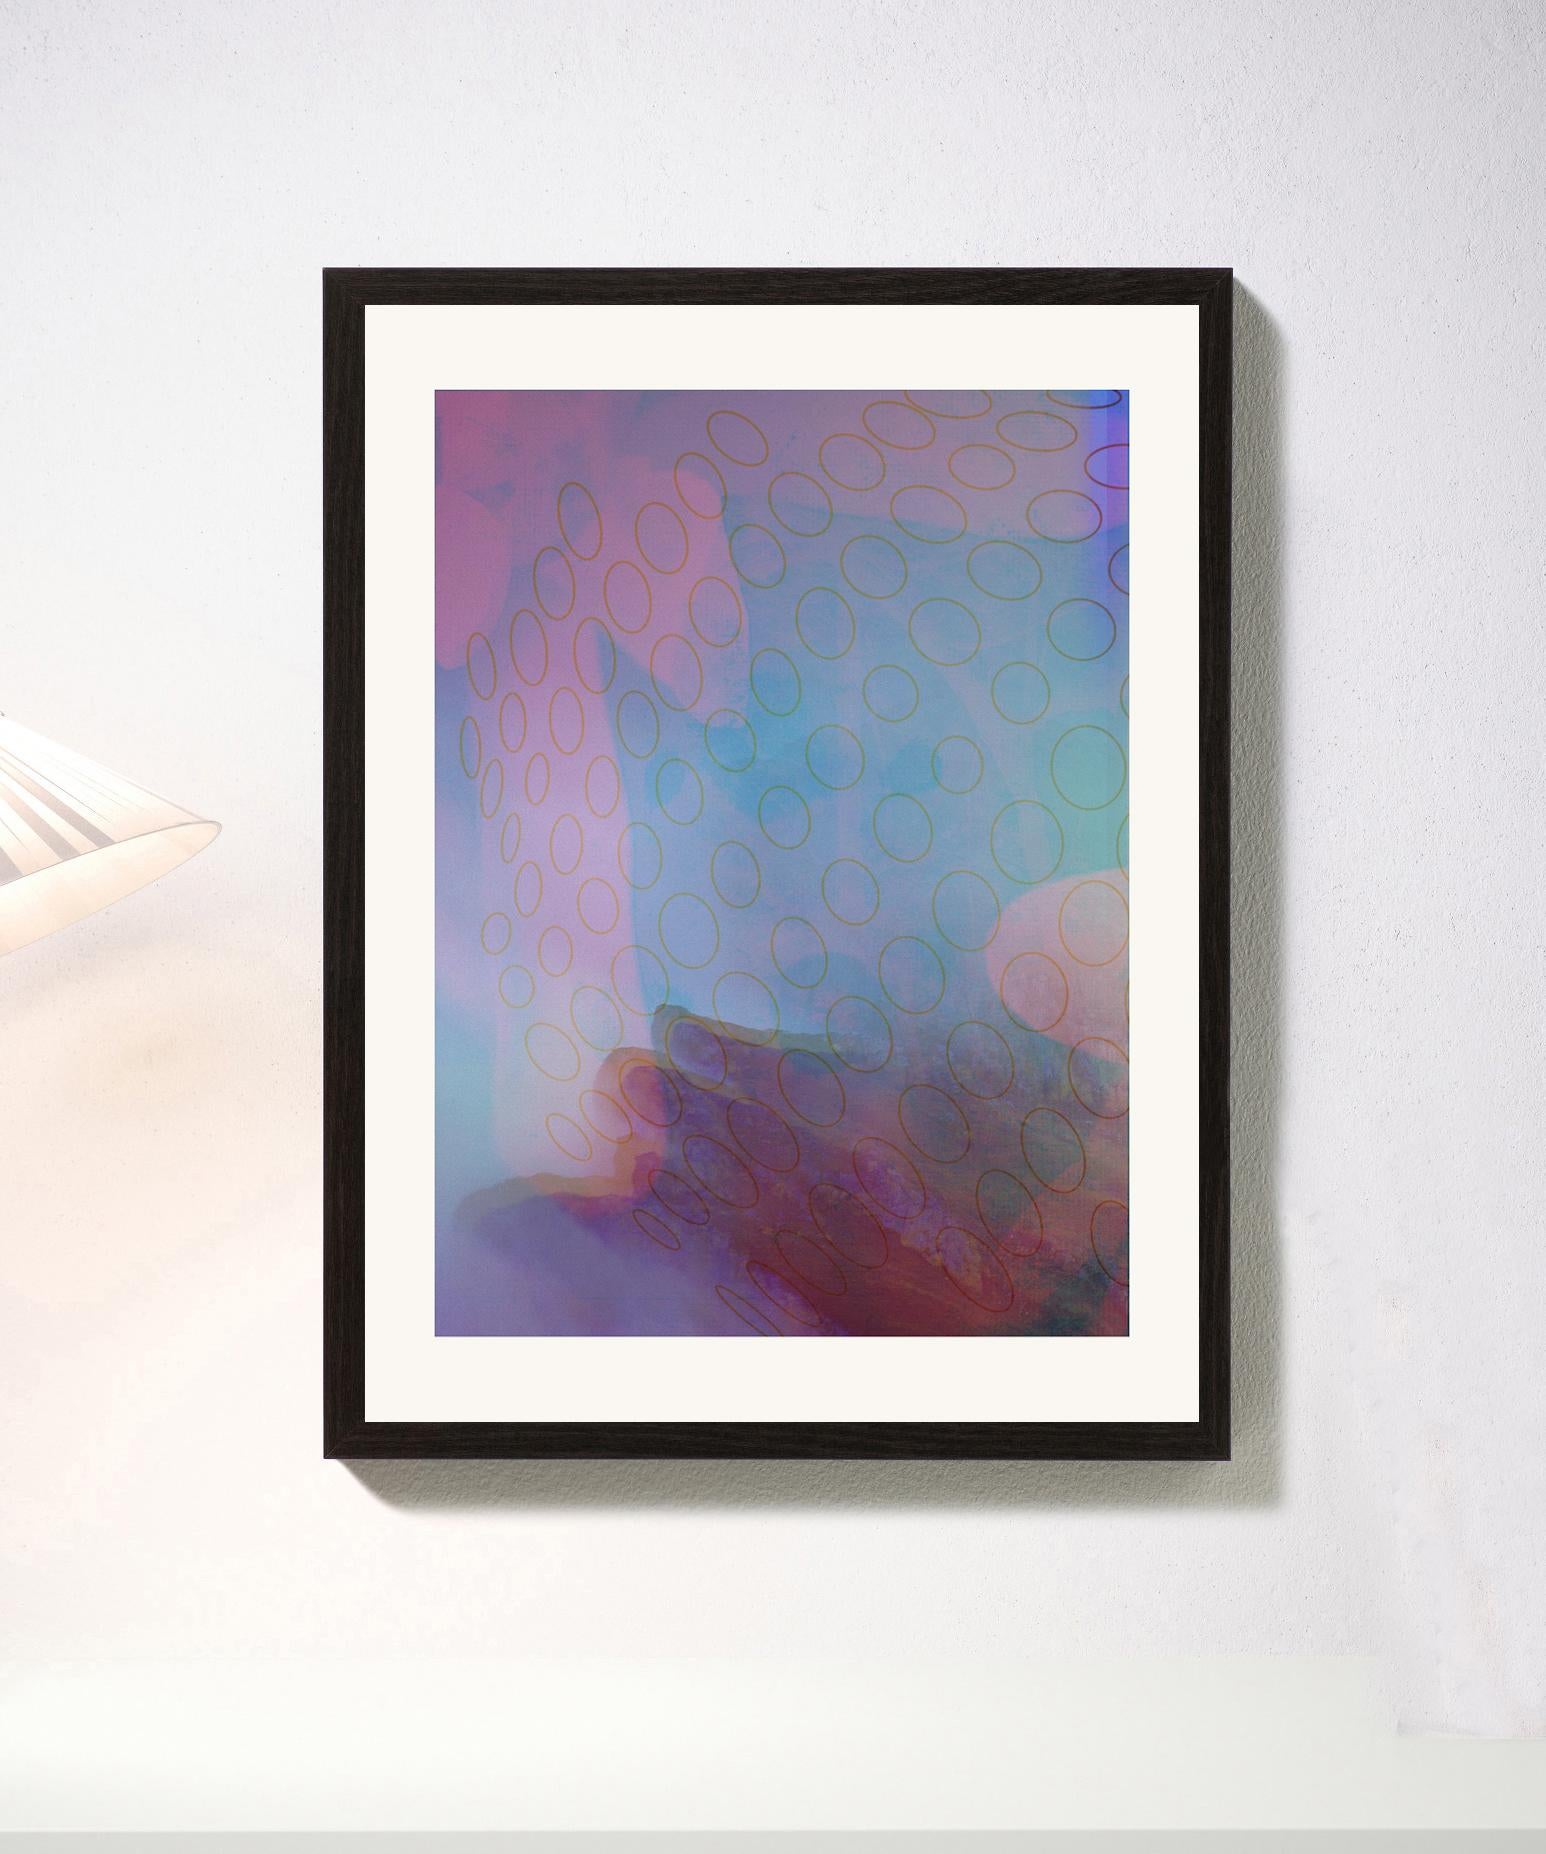 Pink flowers, 2019
Digital pigment print Ultrachrome ink on Fabriano Rosaspina paper. Hand signed by the artist, and certificate of authenticity. Edition of 25  (Unframed)

His work has been shown in Reina Sofía Museum of Madrid, Royal Academy of